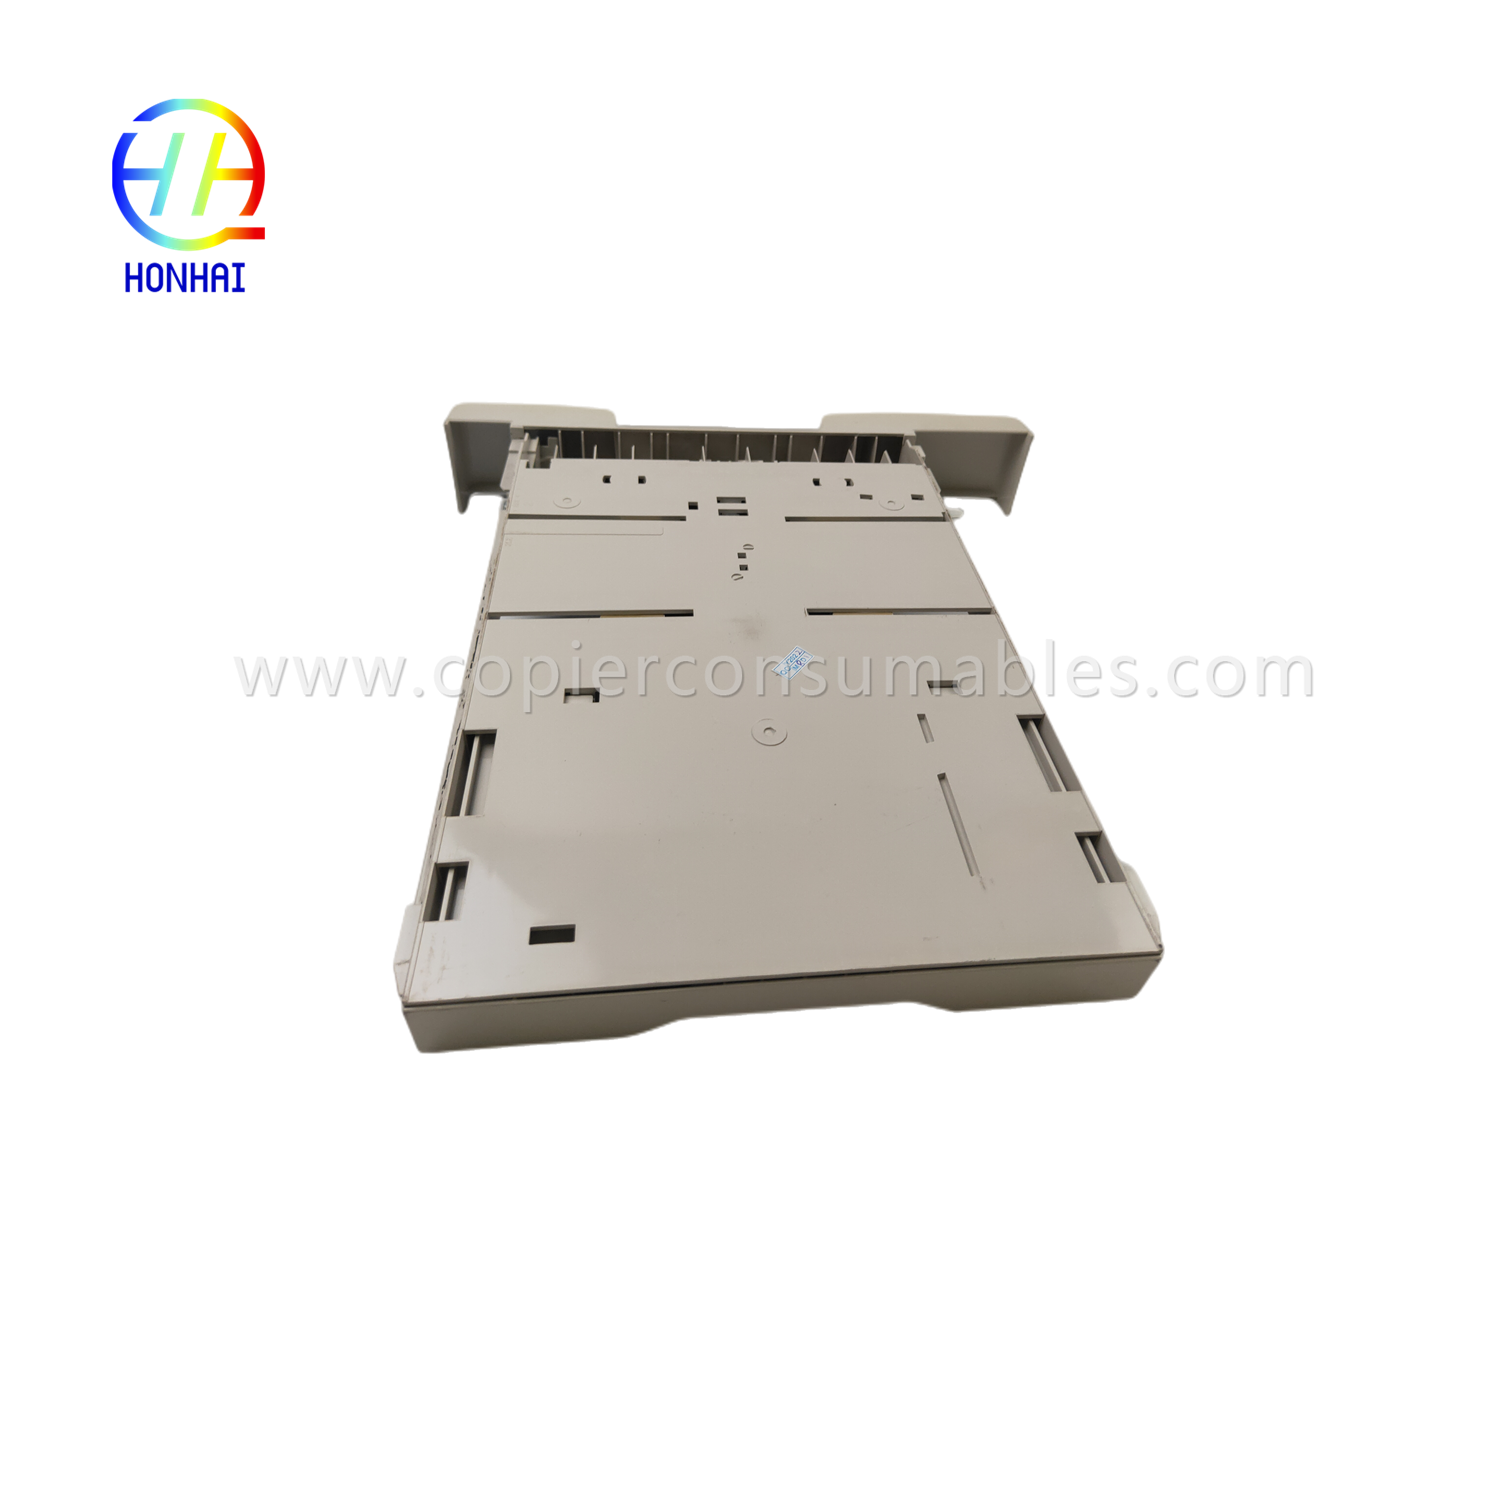 https://c585.goodao.net/cassette-paper-tray-for-xerox-050n00650-phaser-3320dni3315dn-3325dni-product/